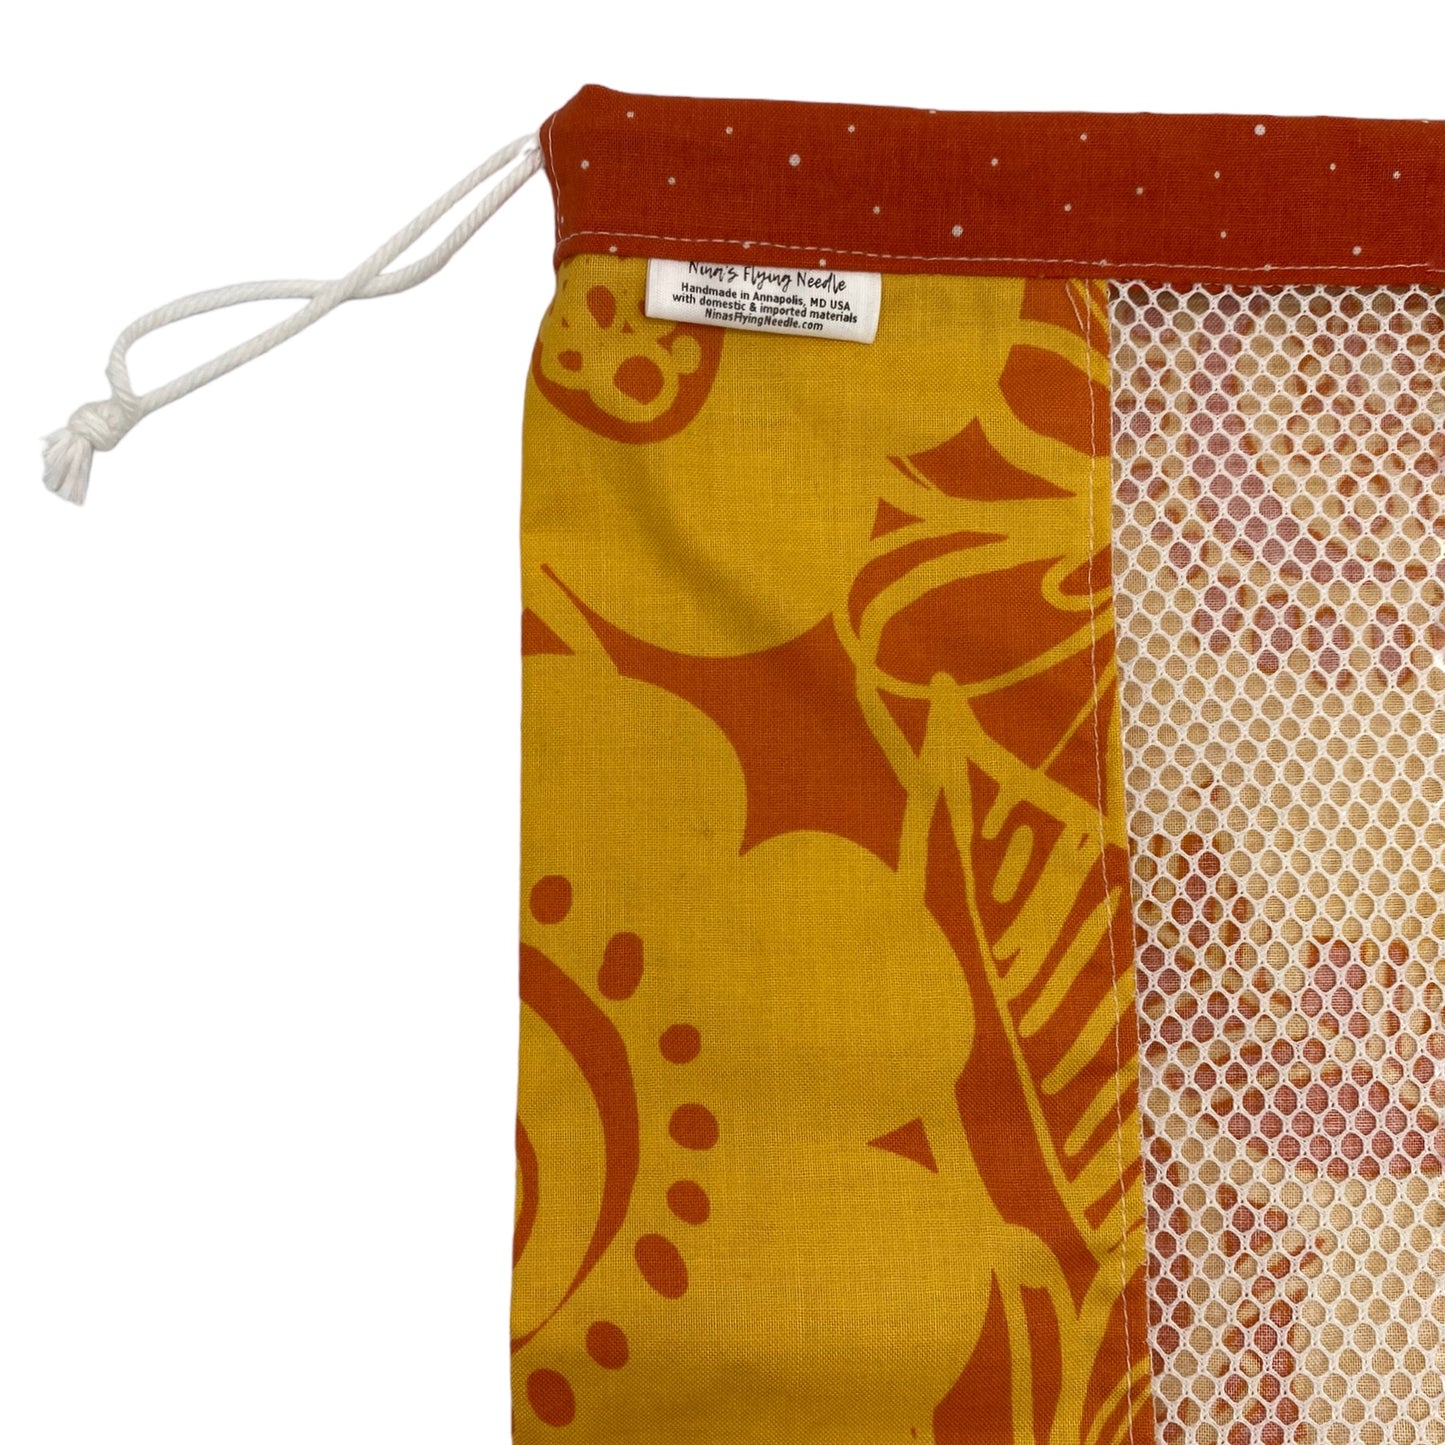 Large Produce Bag Floral Orange and Yellow